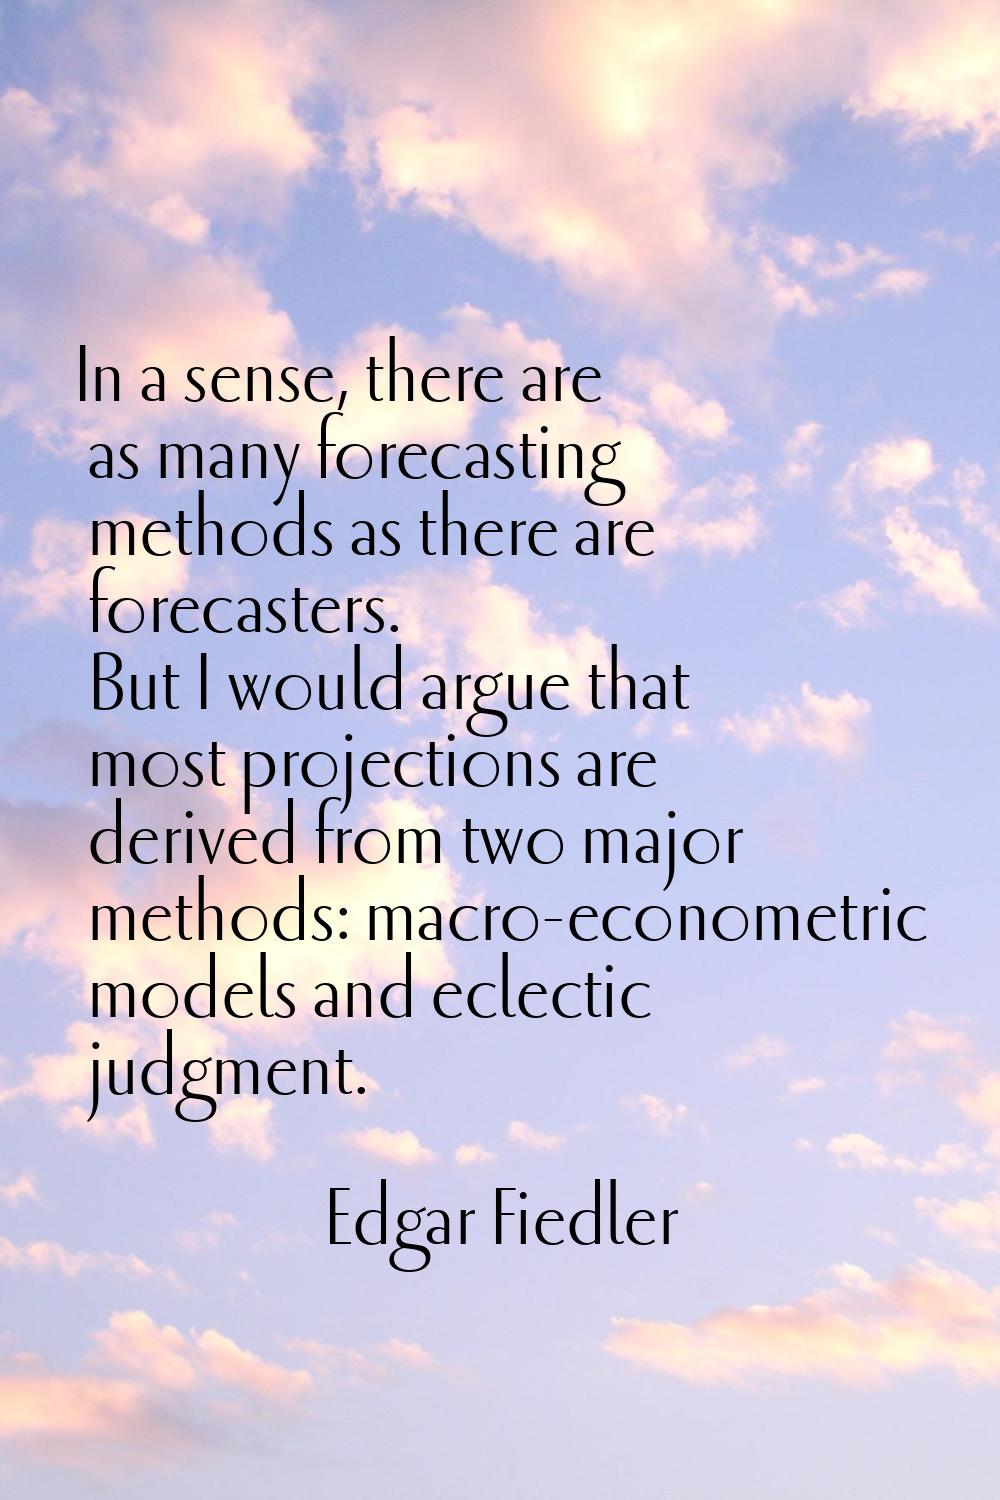 In a sense, there are as many forecasting methods as there are forecasters. But I would argue that 